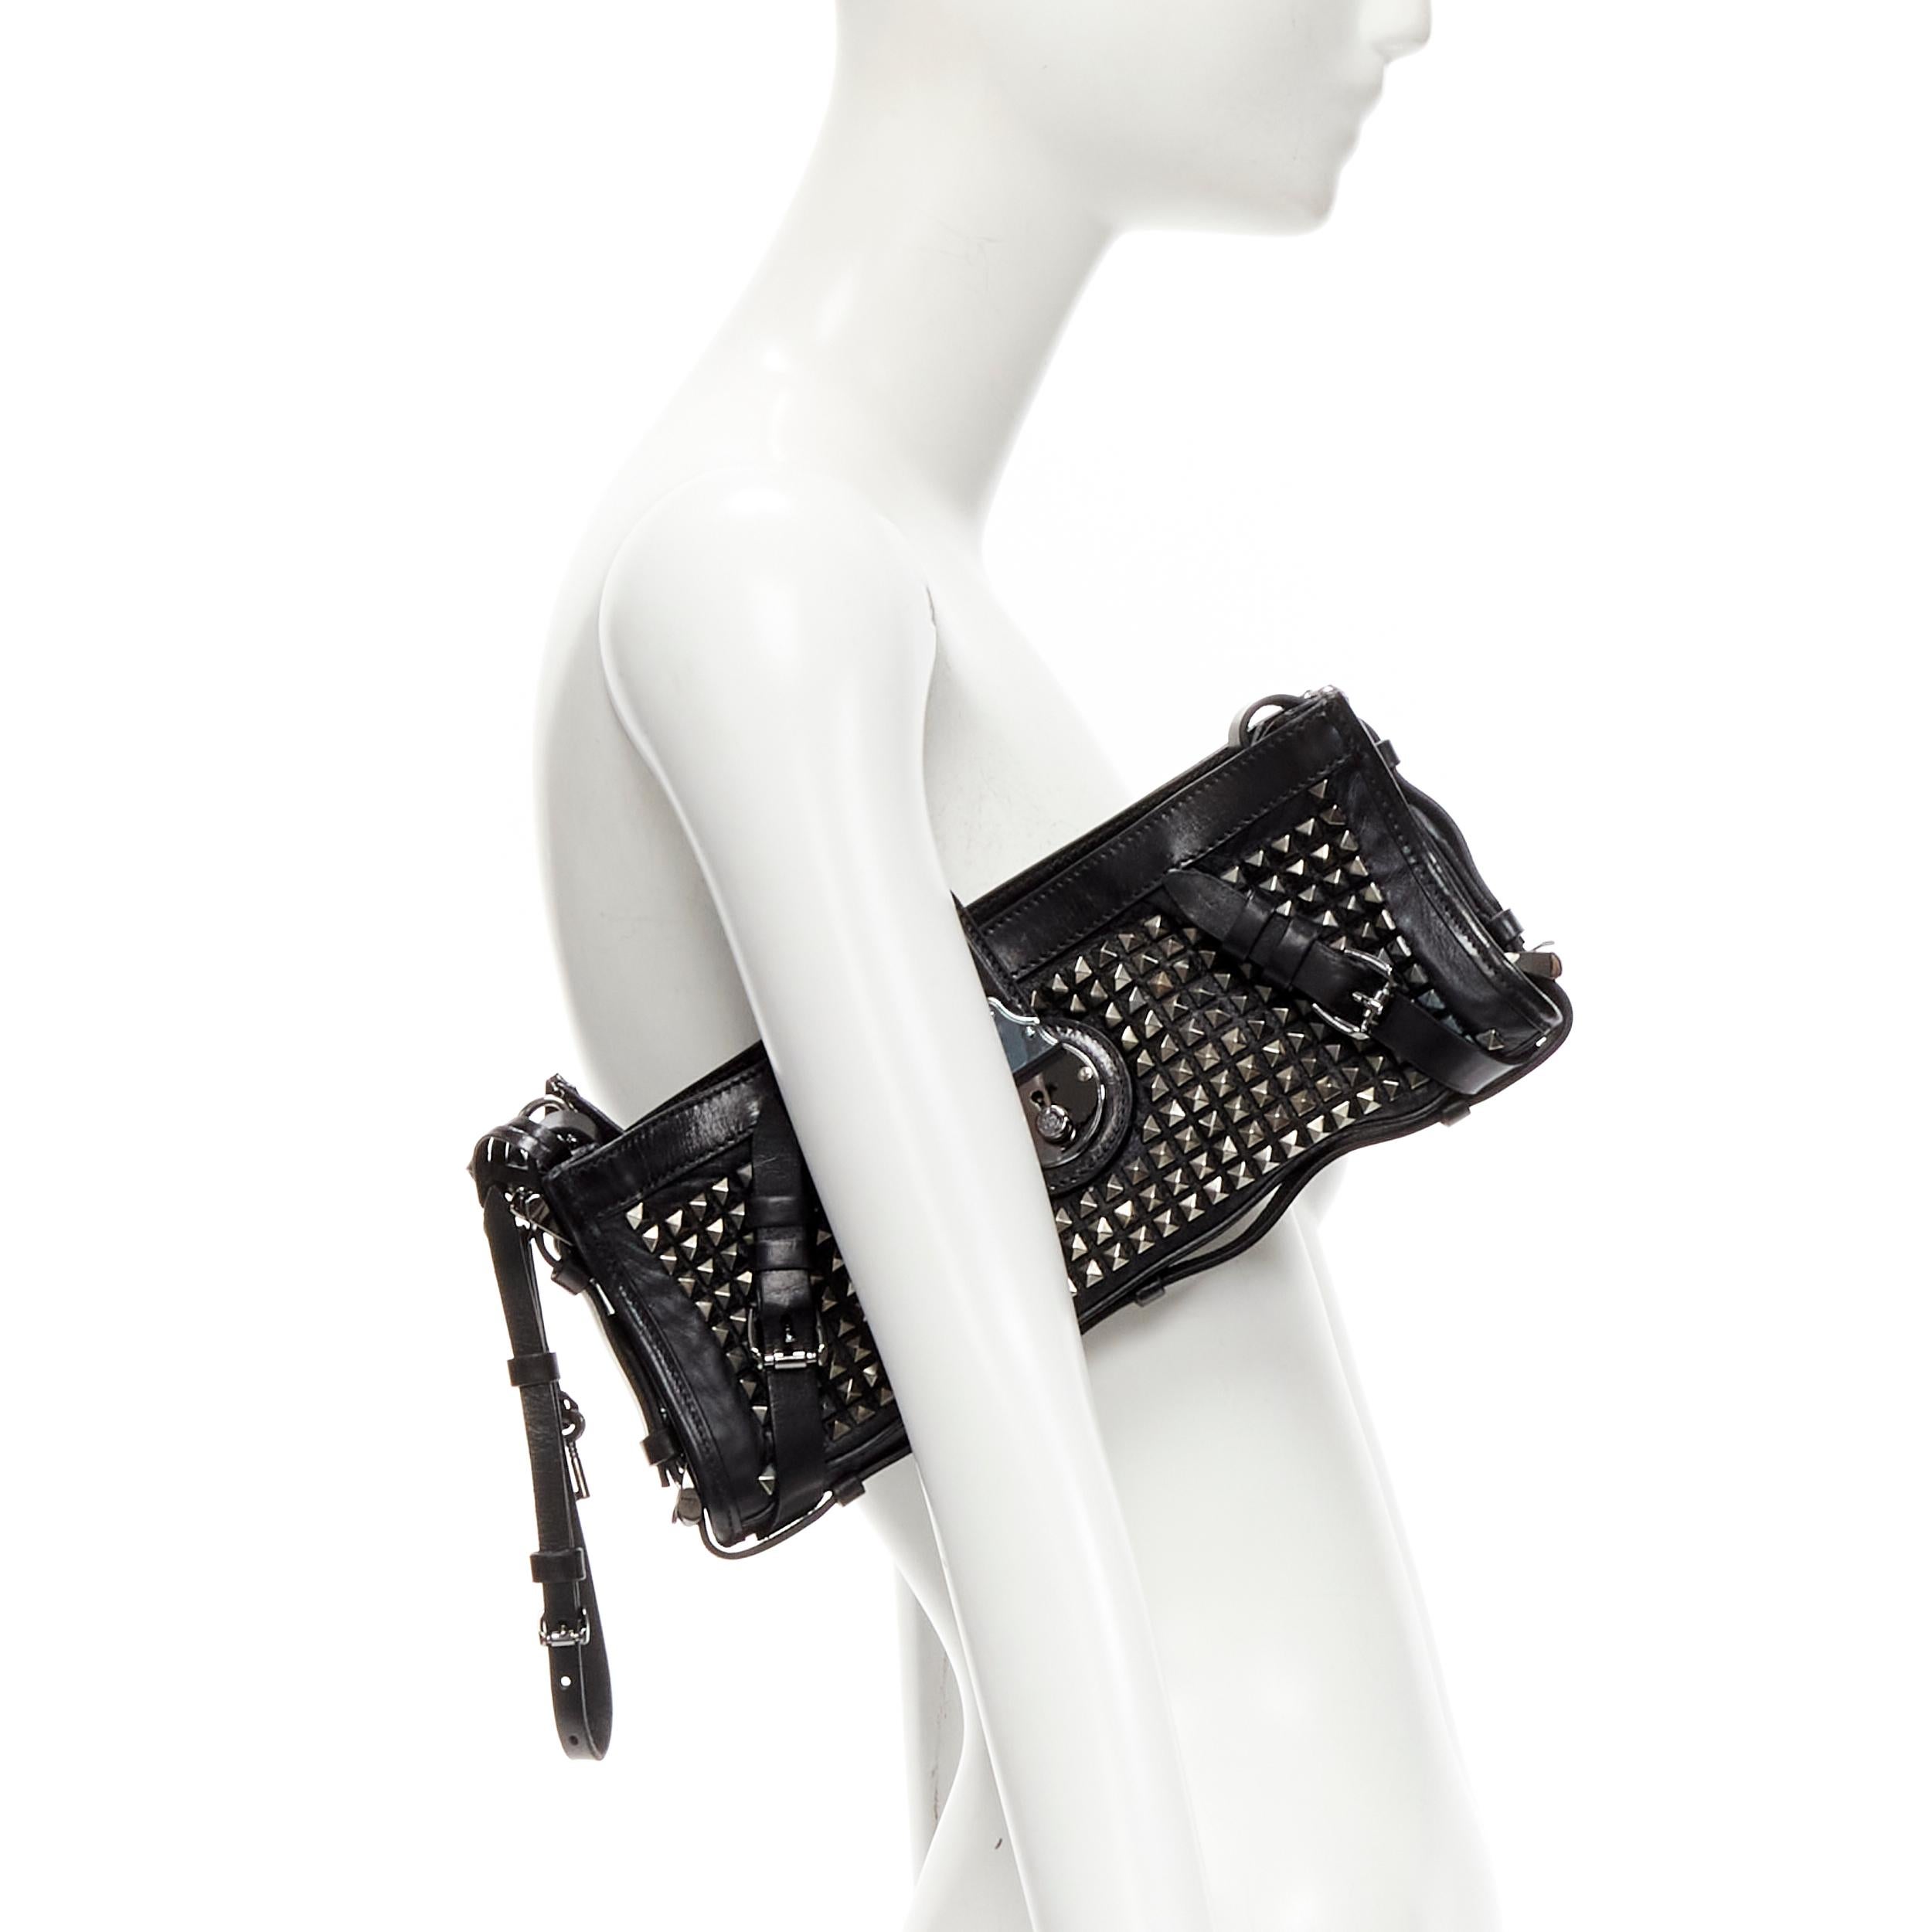 BURBERRY PRORSUM Knight black punk studded leather ruthenium buckle clutch
Reference: LNKO/A02087
Brand: Burberry
Designer: Christopher Bailey
Collection: Knight
Material: Leather
Color: Black, Silver
Pattern: Solid
Closure: Buckle
Lining: